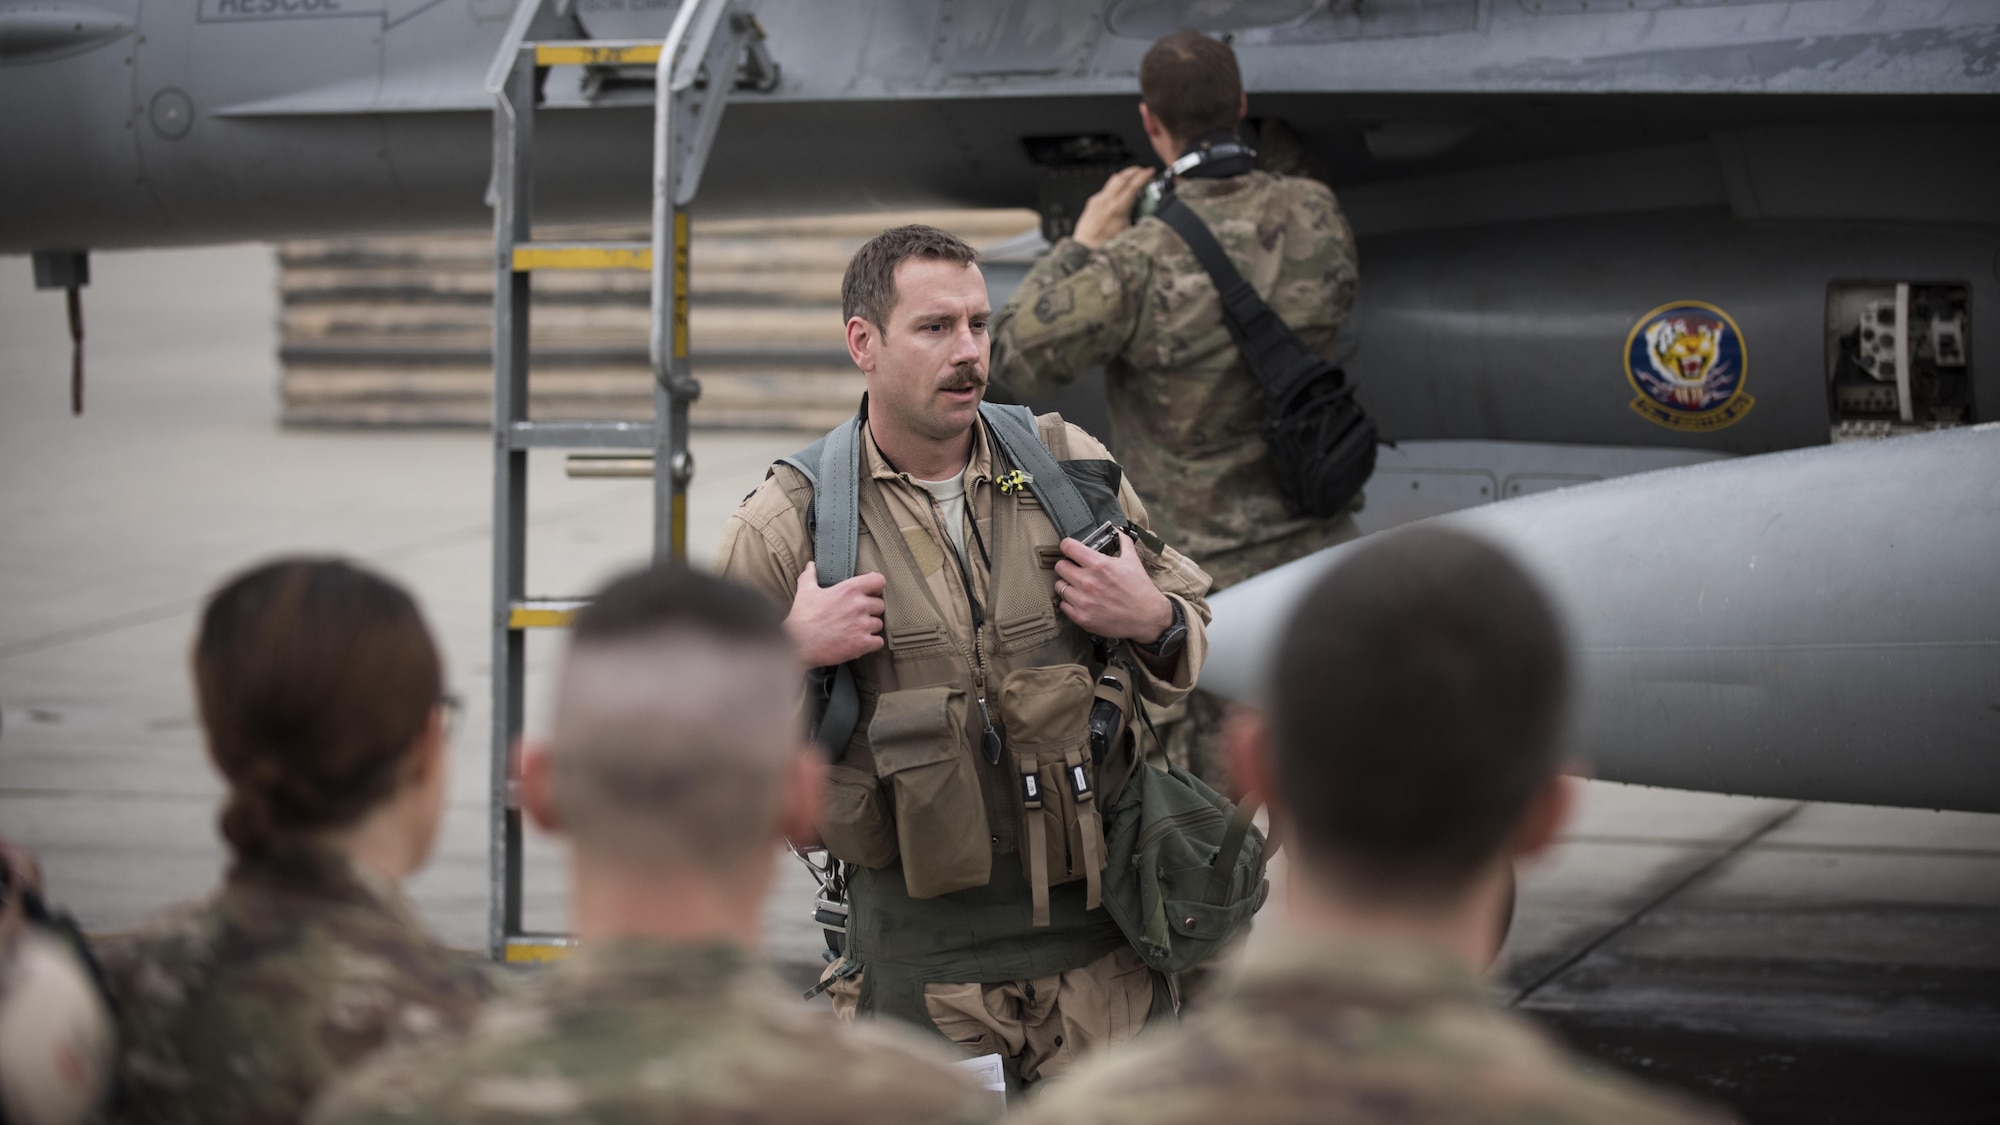 Lt. Col. Craig Andrle, 79th Expeditionary Fighter Squadron commander, speaks to squadron members after flying his 1,000th combat hour March 20, 2017 at Bagram Airfield, Afghanistan. There are only four F-16 Fighting Falcon pilots, lieutenant colonel and below, currently serving in the Air Force who have reached 1,000 combat hours. (U.S. Air Force photo by Staff Sgt. Katherine Spessa)